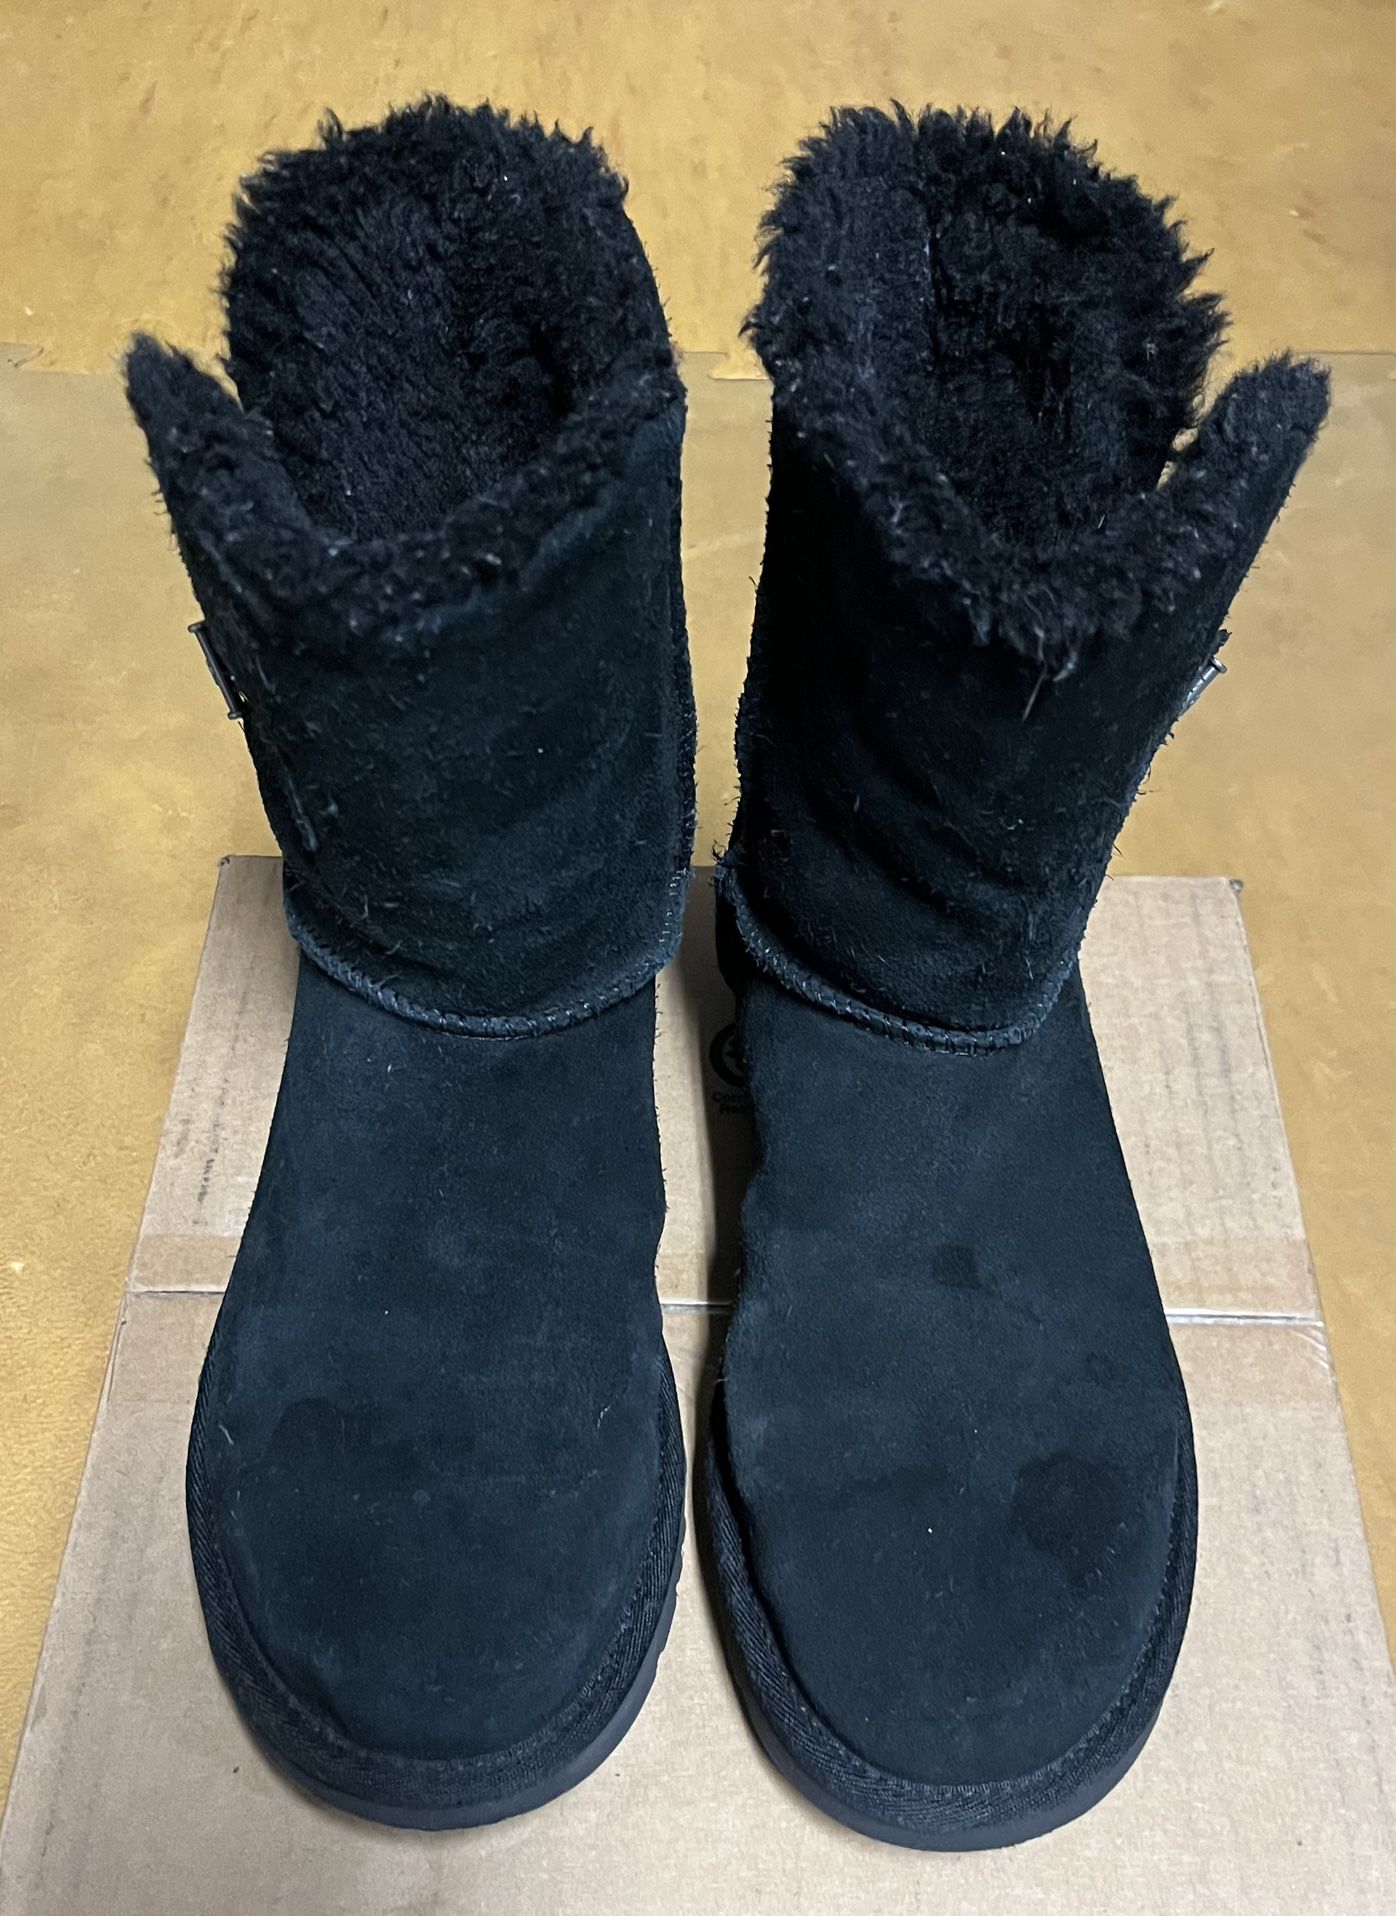 Women’s UGG Black Leather Winter Boots